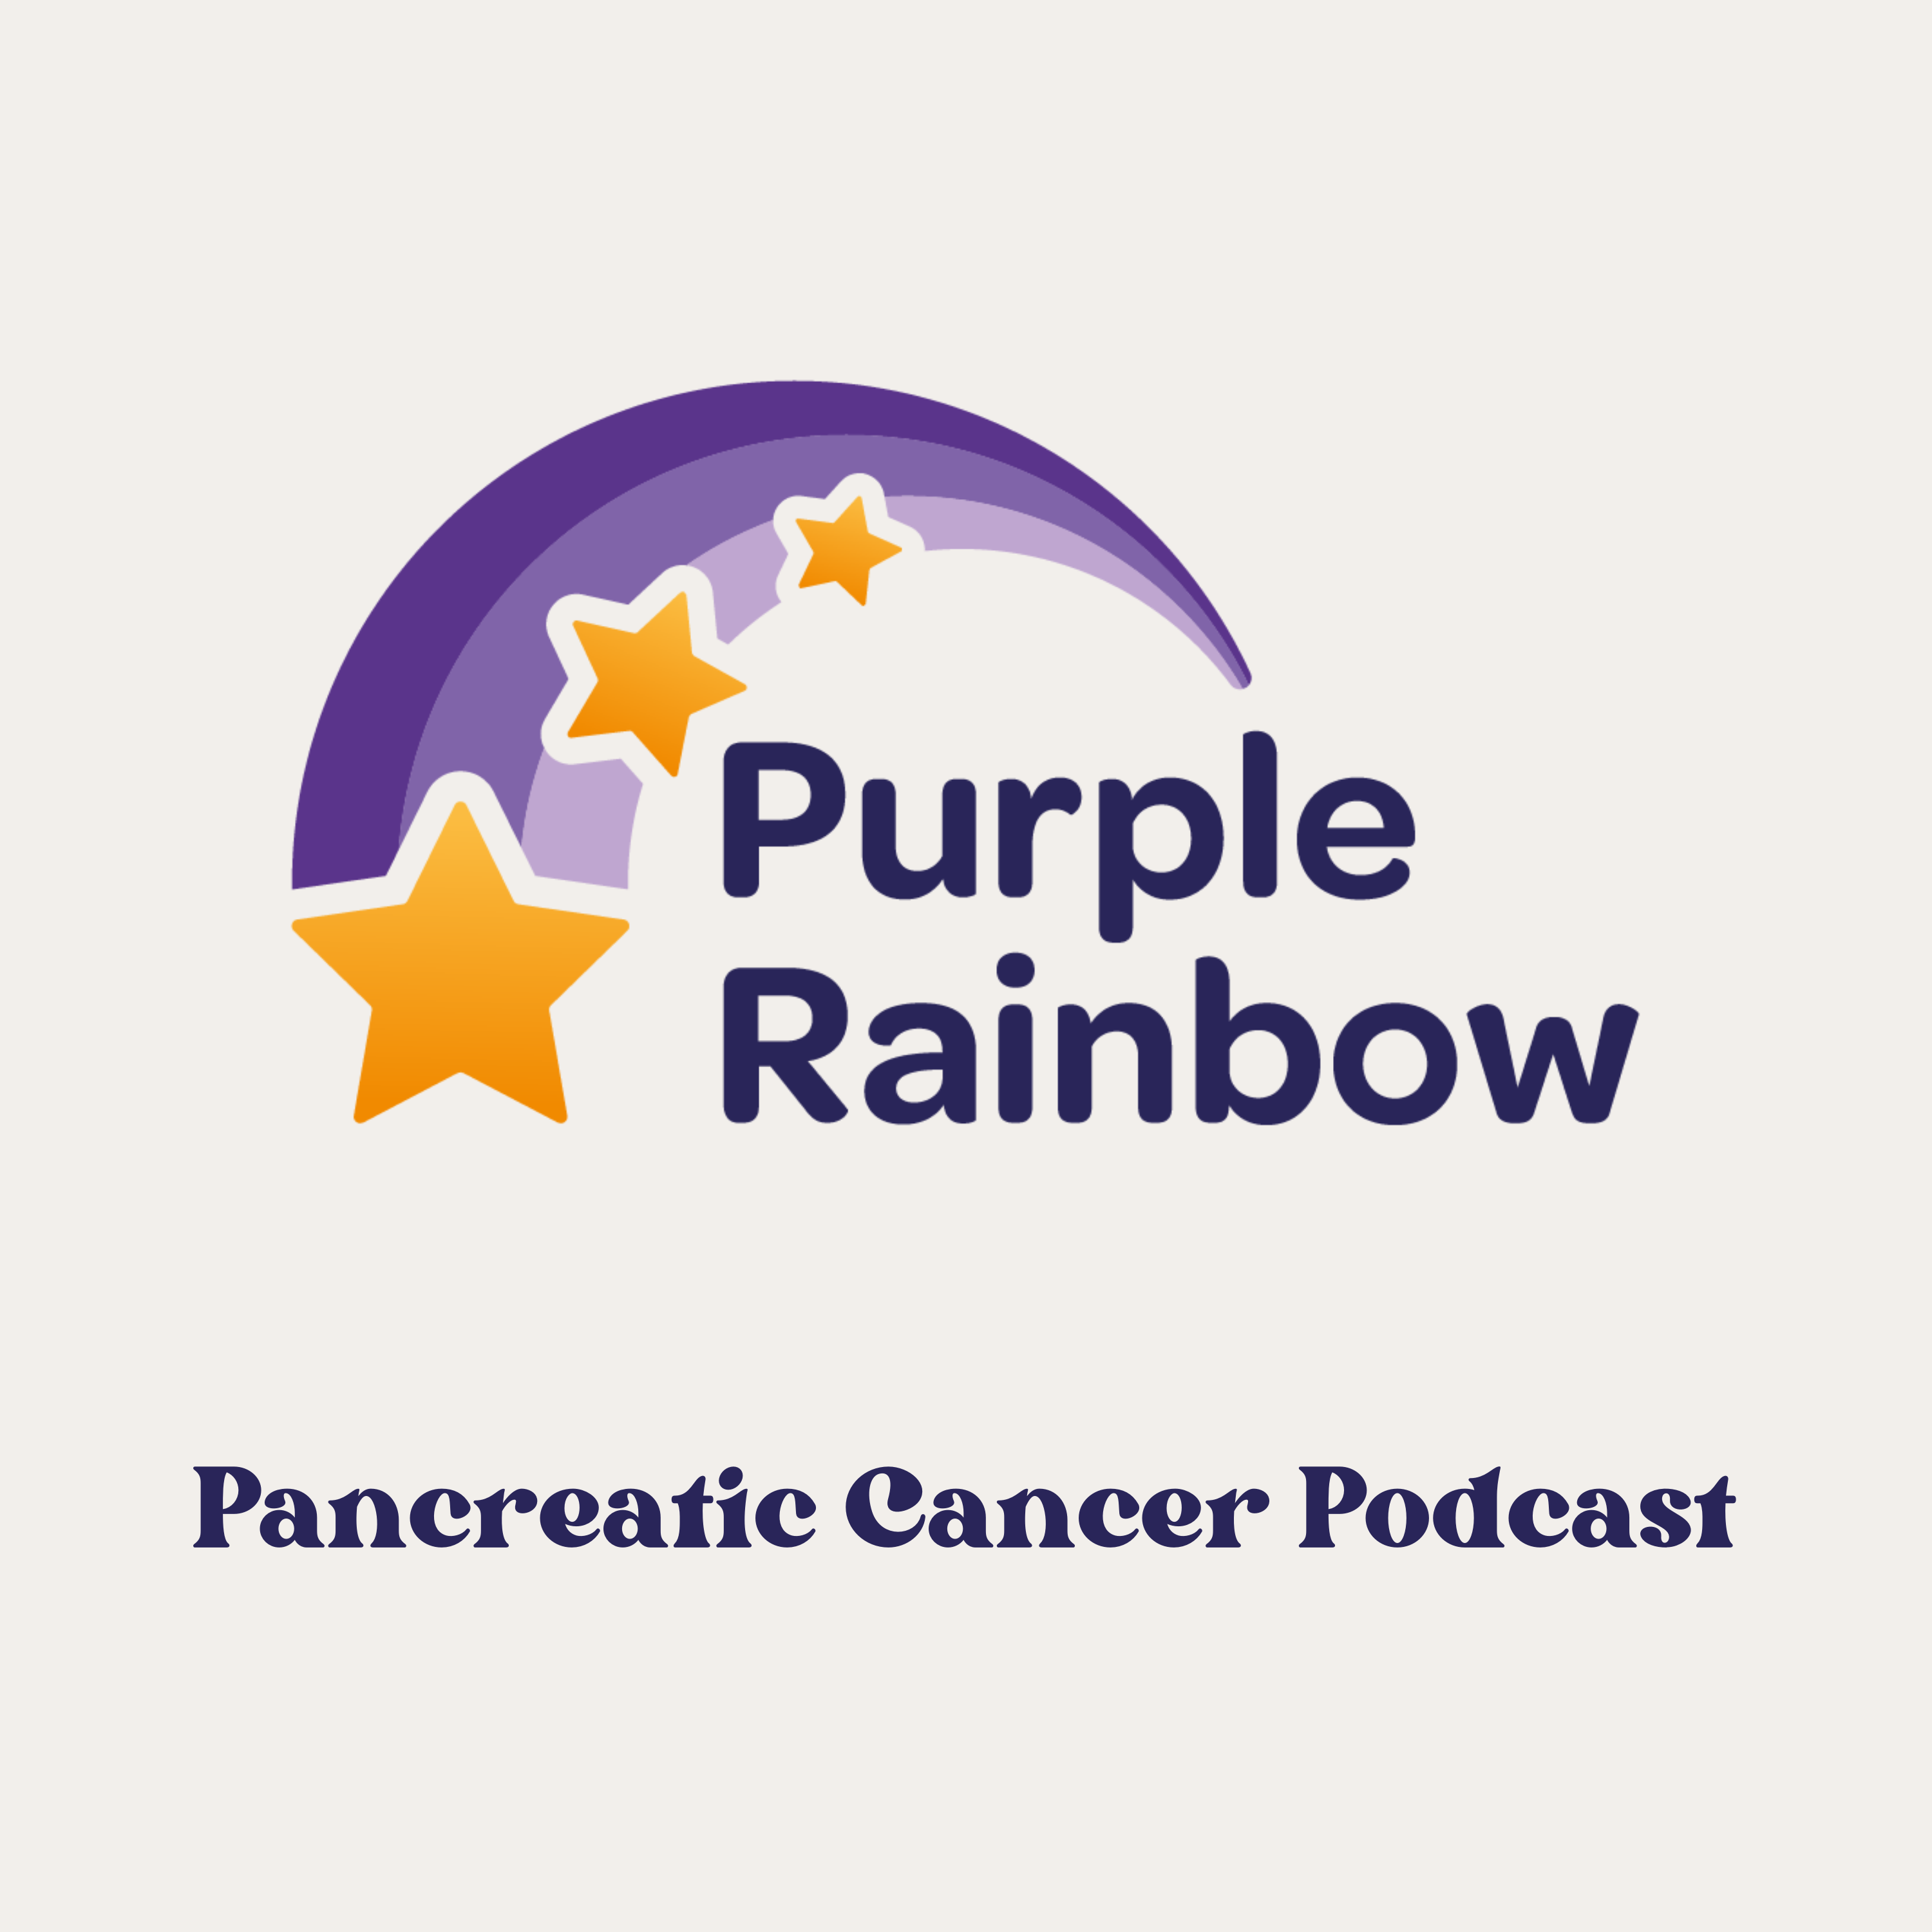 Artwork for podcast Purple Rainbow Pancreatic Cancer Podcast